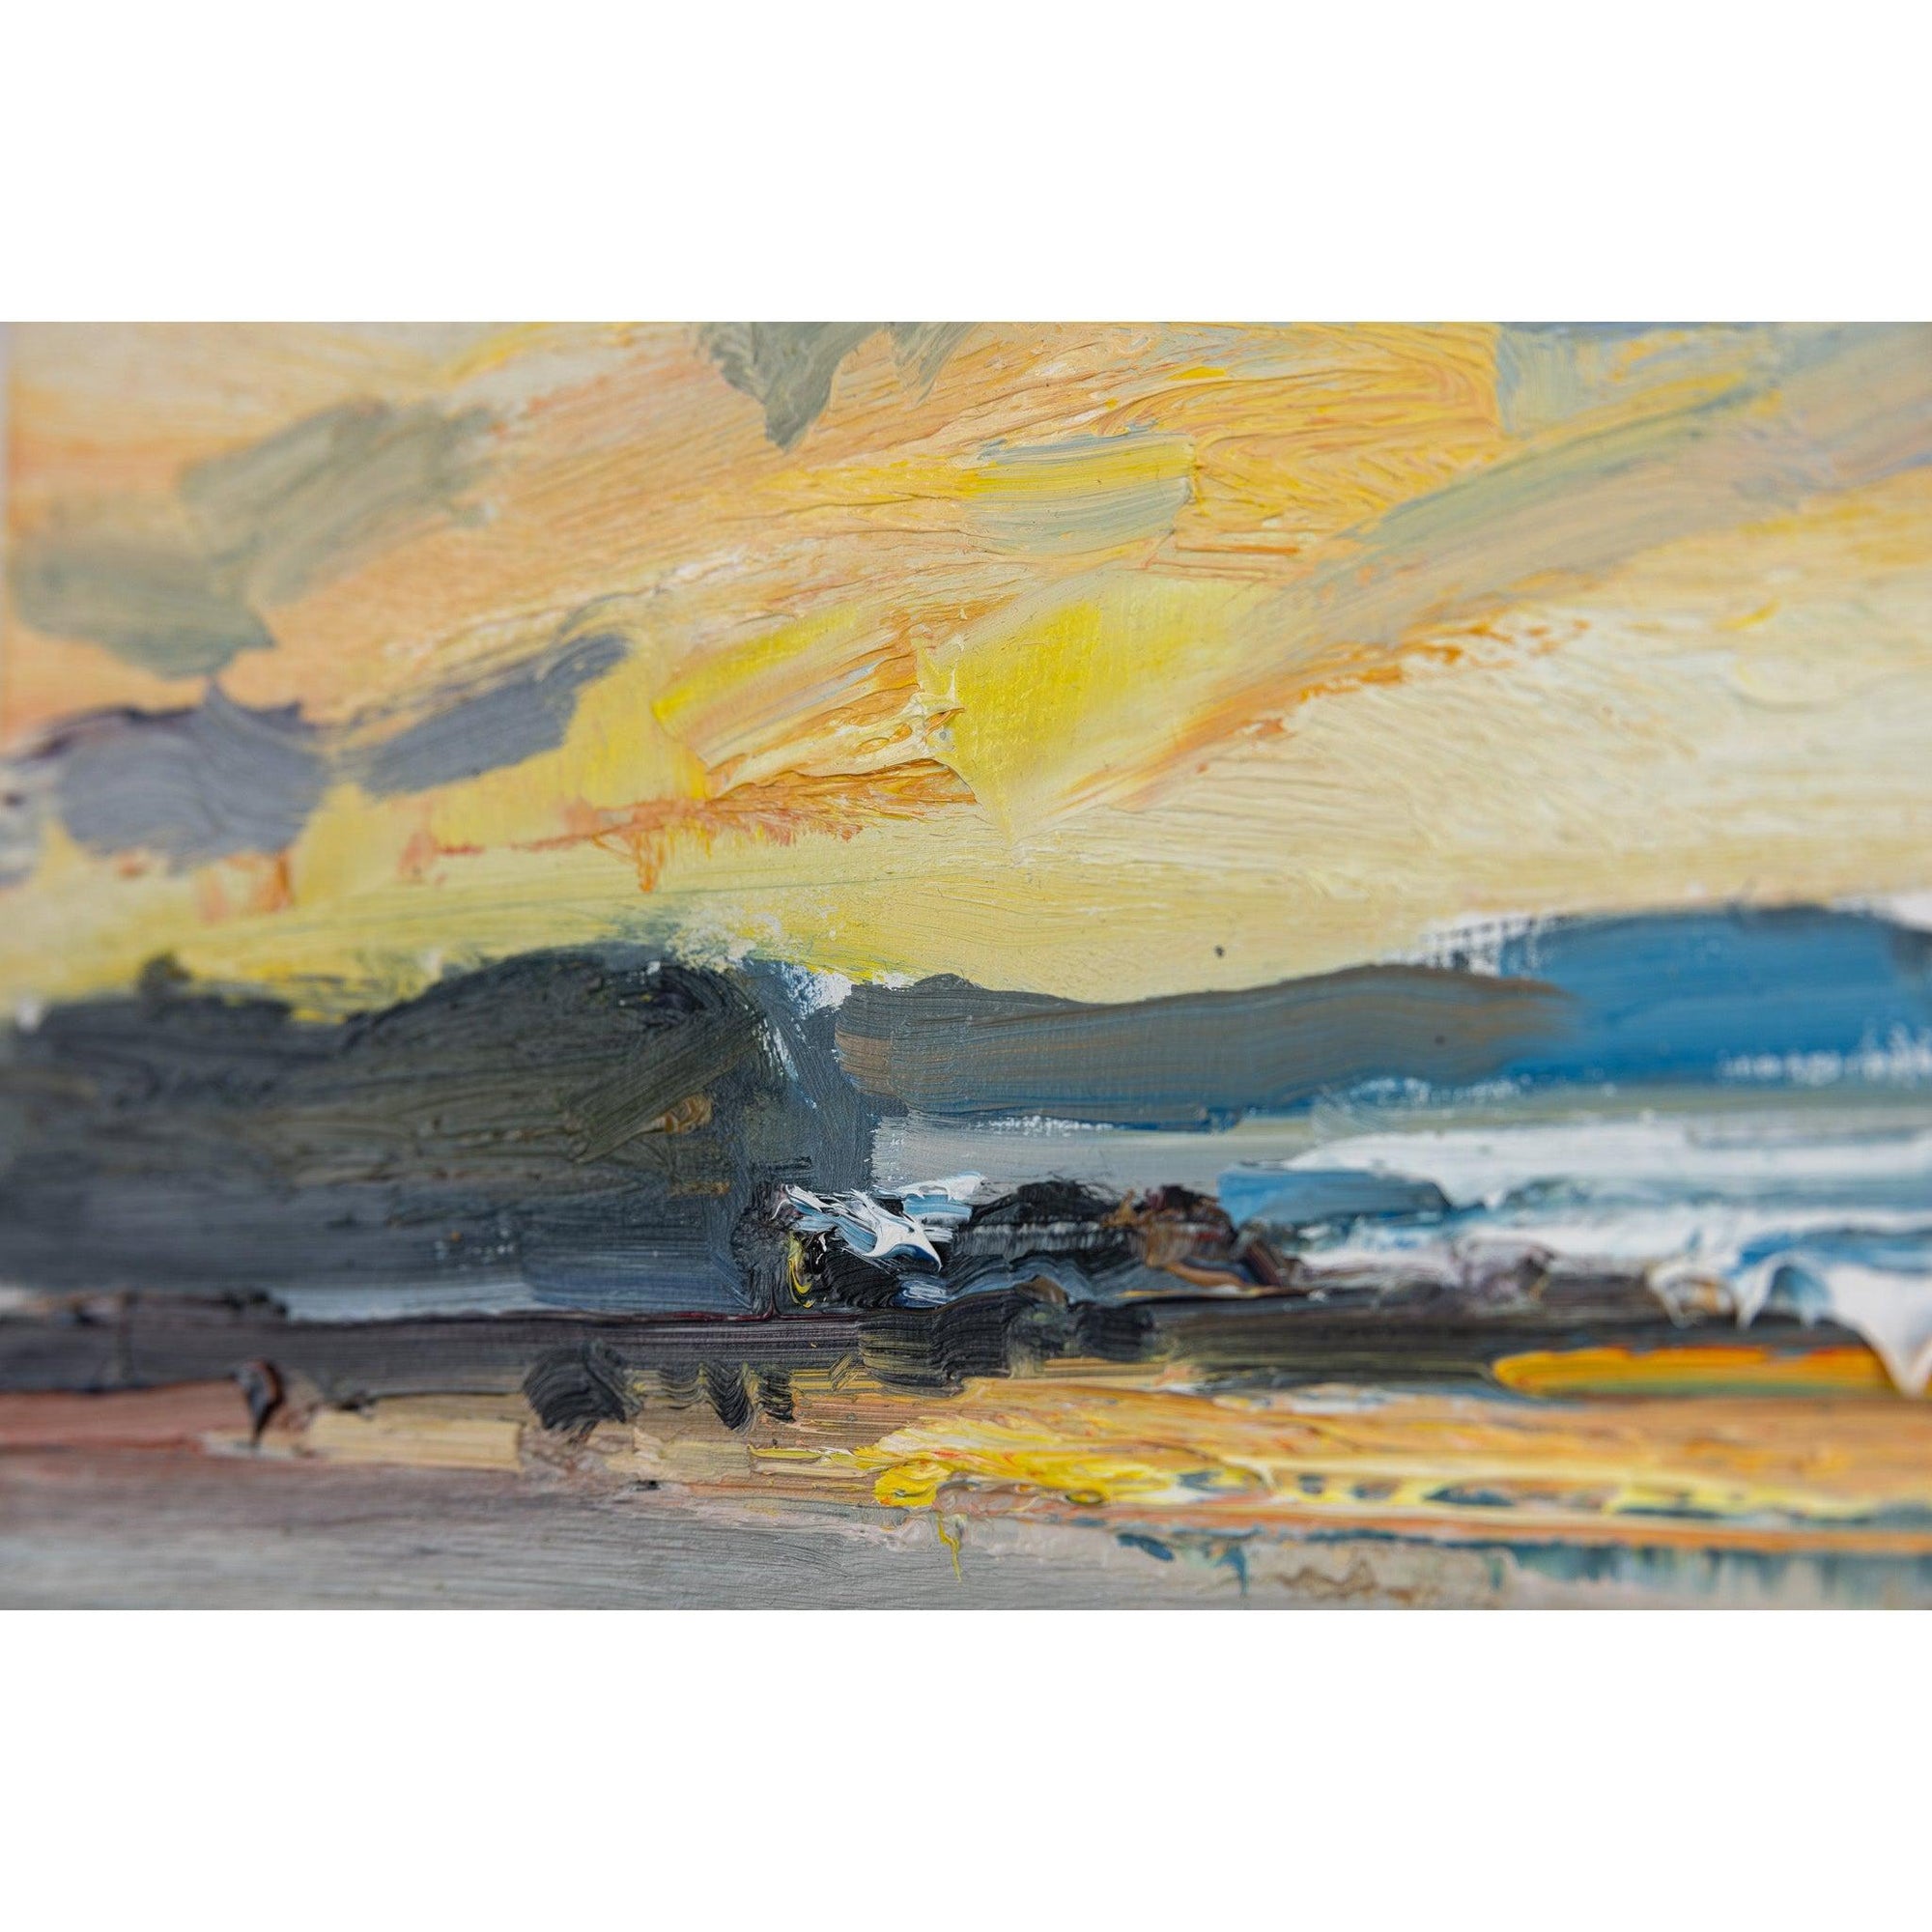 'Sunset, Trevone Bay' oil on board original by David Atkins, available at Padstow Gallery, Cornwall